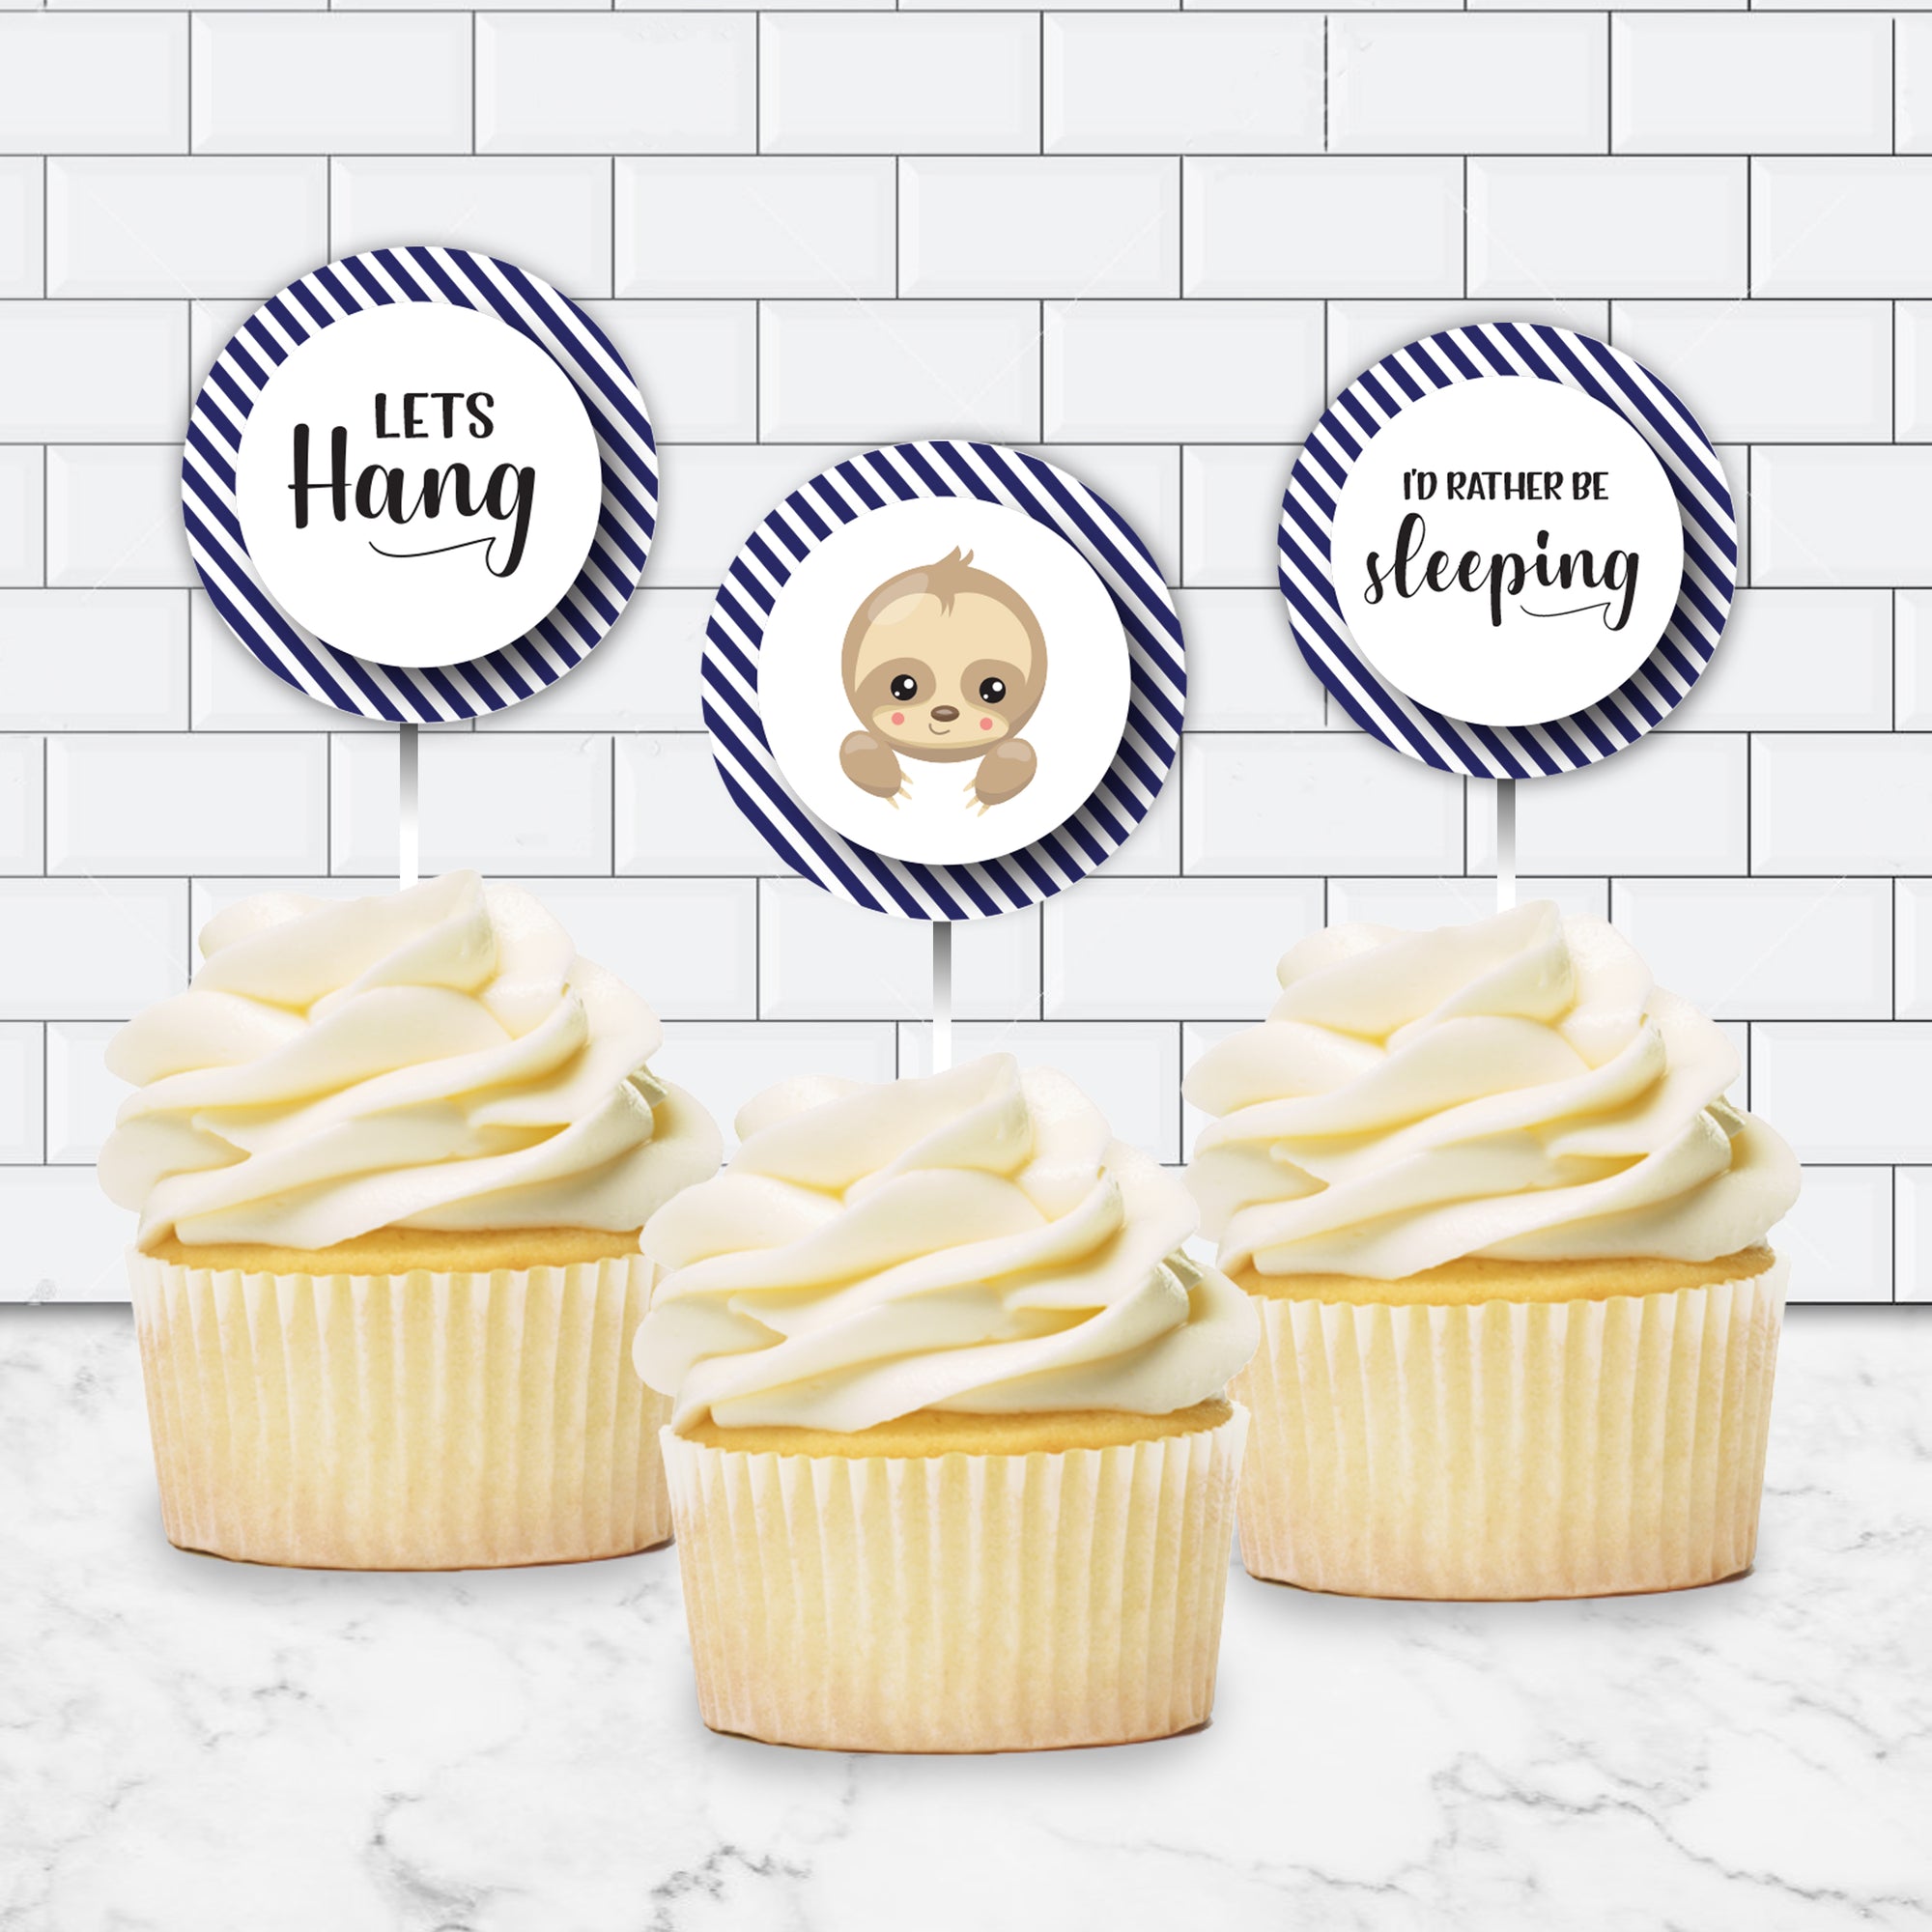 Editable Navy Blue Sloth Cupcake Toppers for Gender Neutral Baby Shower